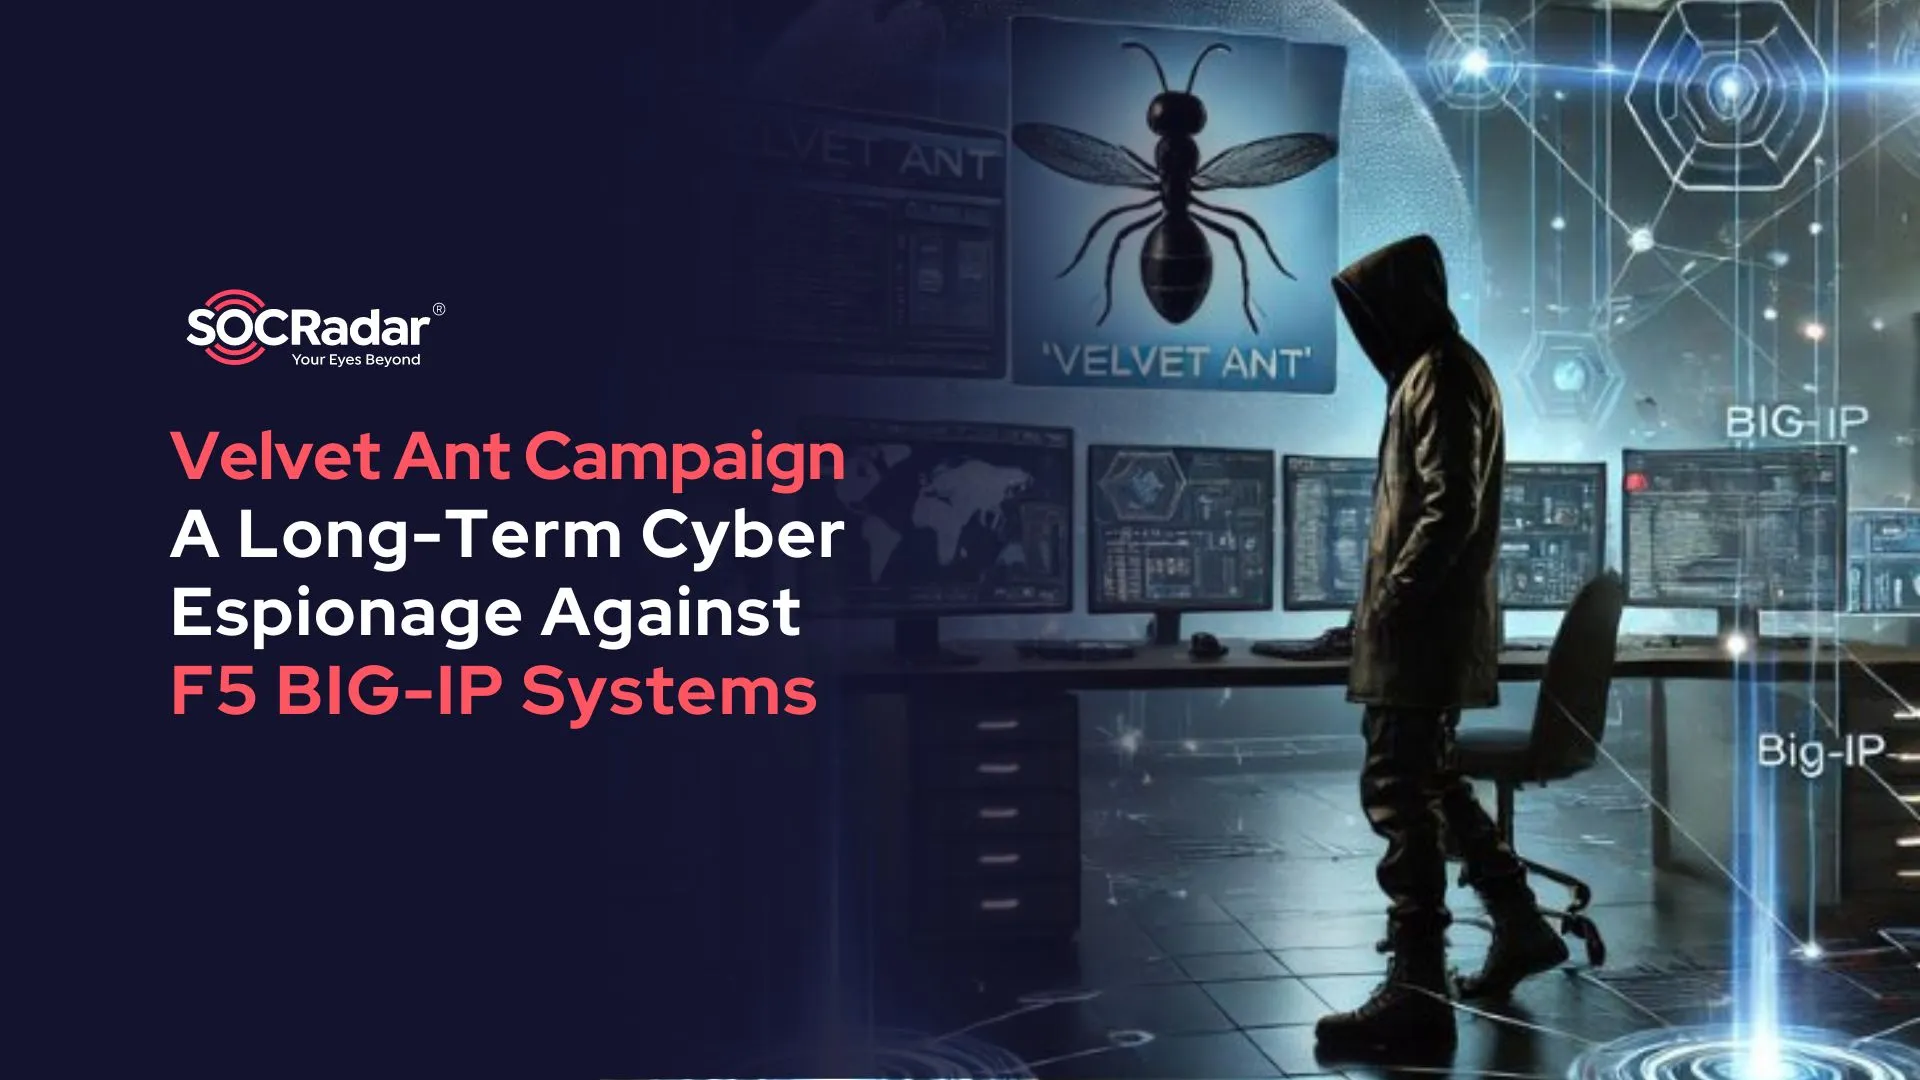 SOCRadar® Cyber Intelligence Inc. | Velvet Ant’s Strategic Targeting: A Long-Term Cyber Espionage Campaign Against F5 BIG-IP Systems